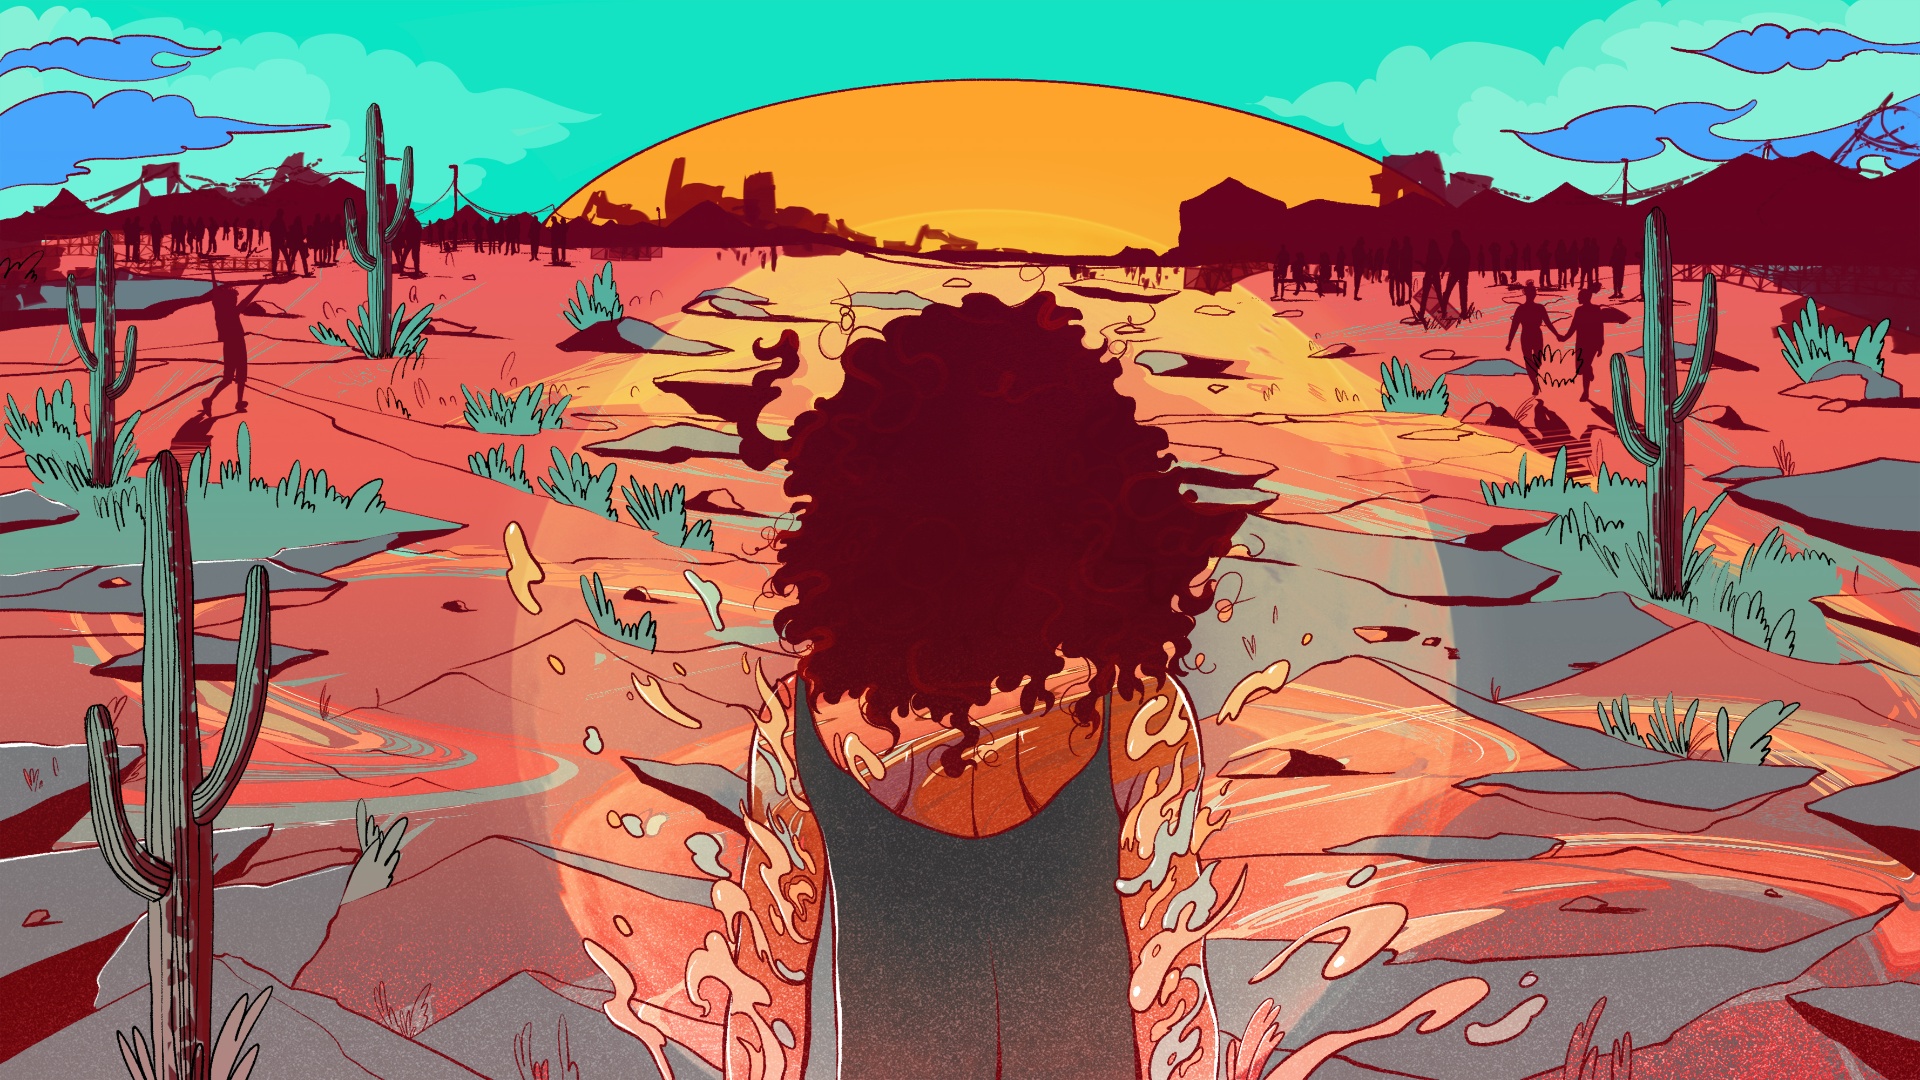 Illustration of a person with curly hair surrounded by a halo of swirling colors, looking out over a desert-scape